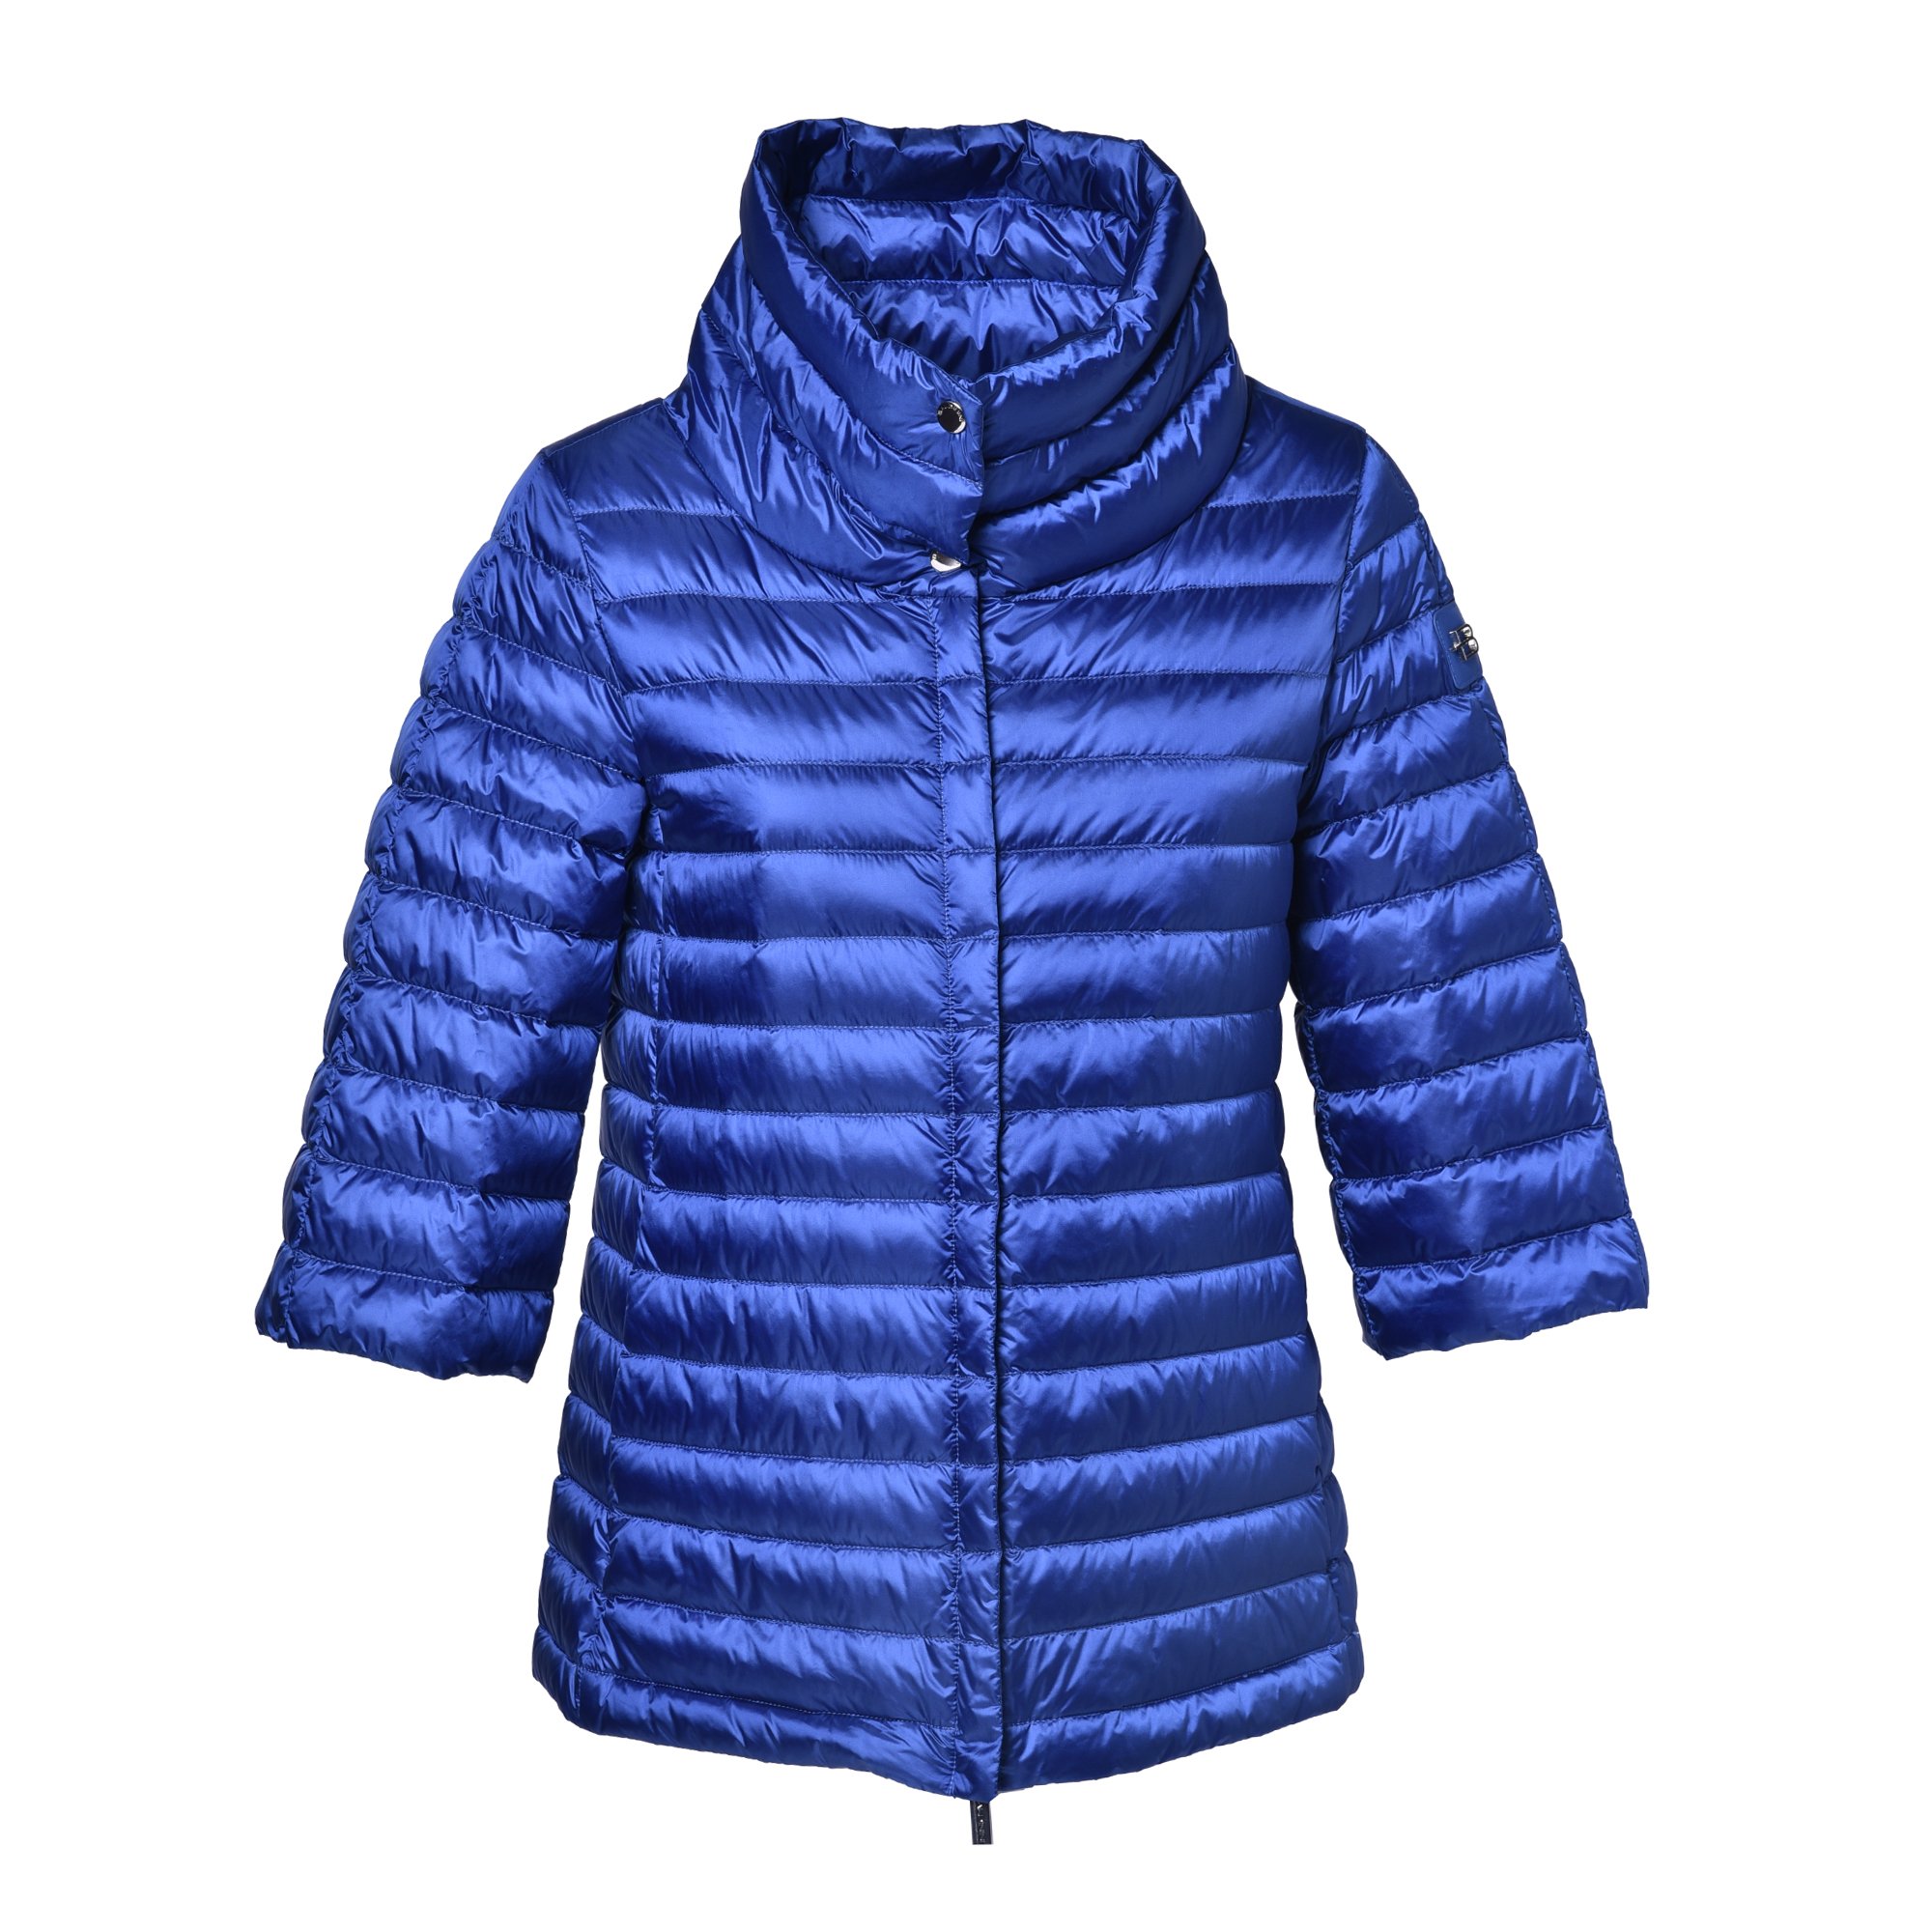 Down jacket in electric blue nylon image